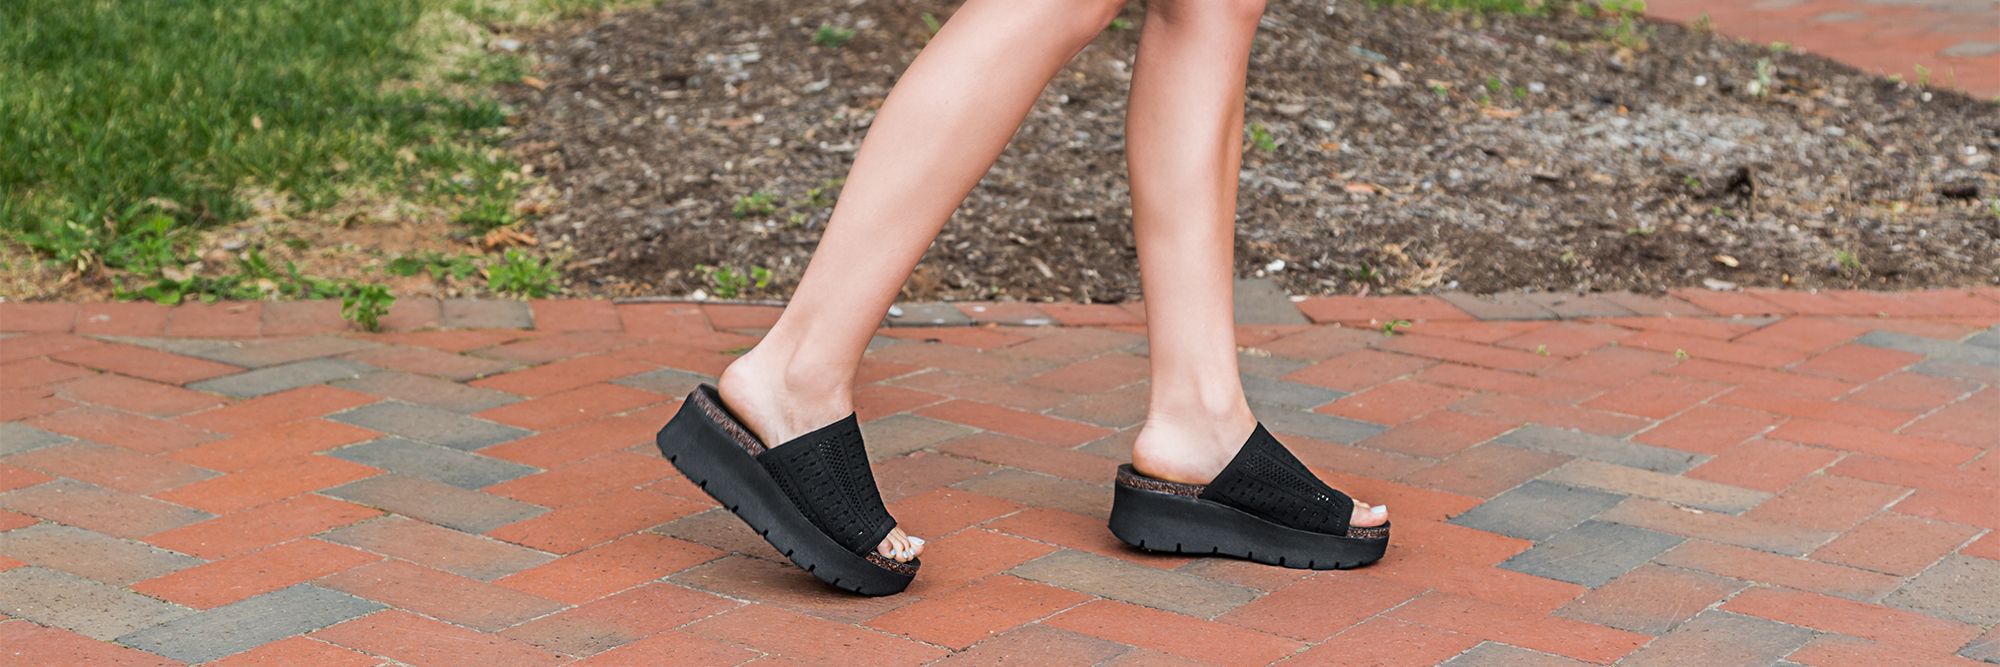 Check out the Gravity, lightweight, comfortable women's sandals, new from OTBT Shoes!